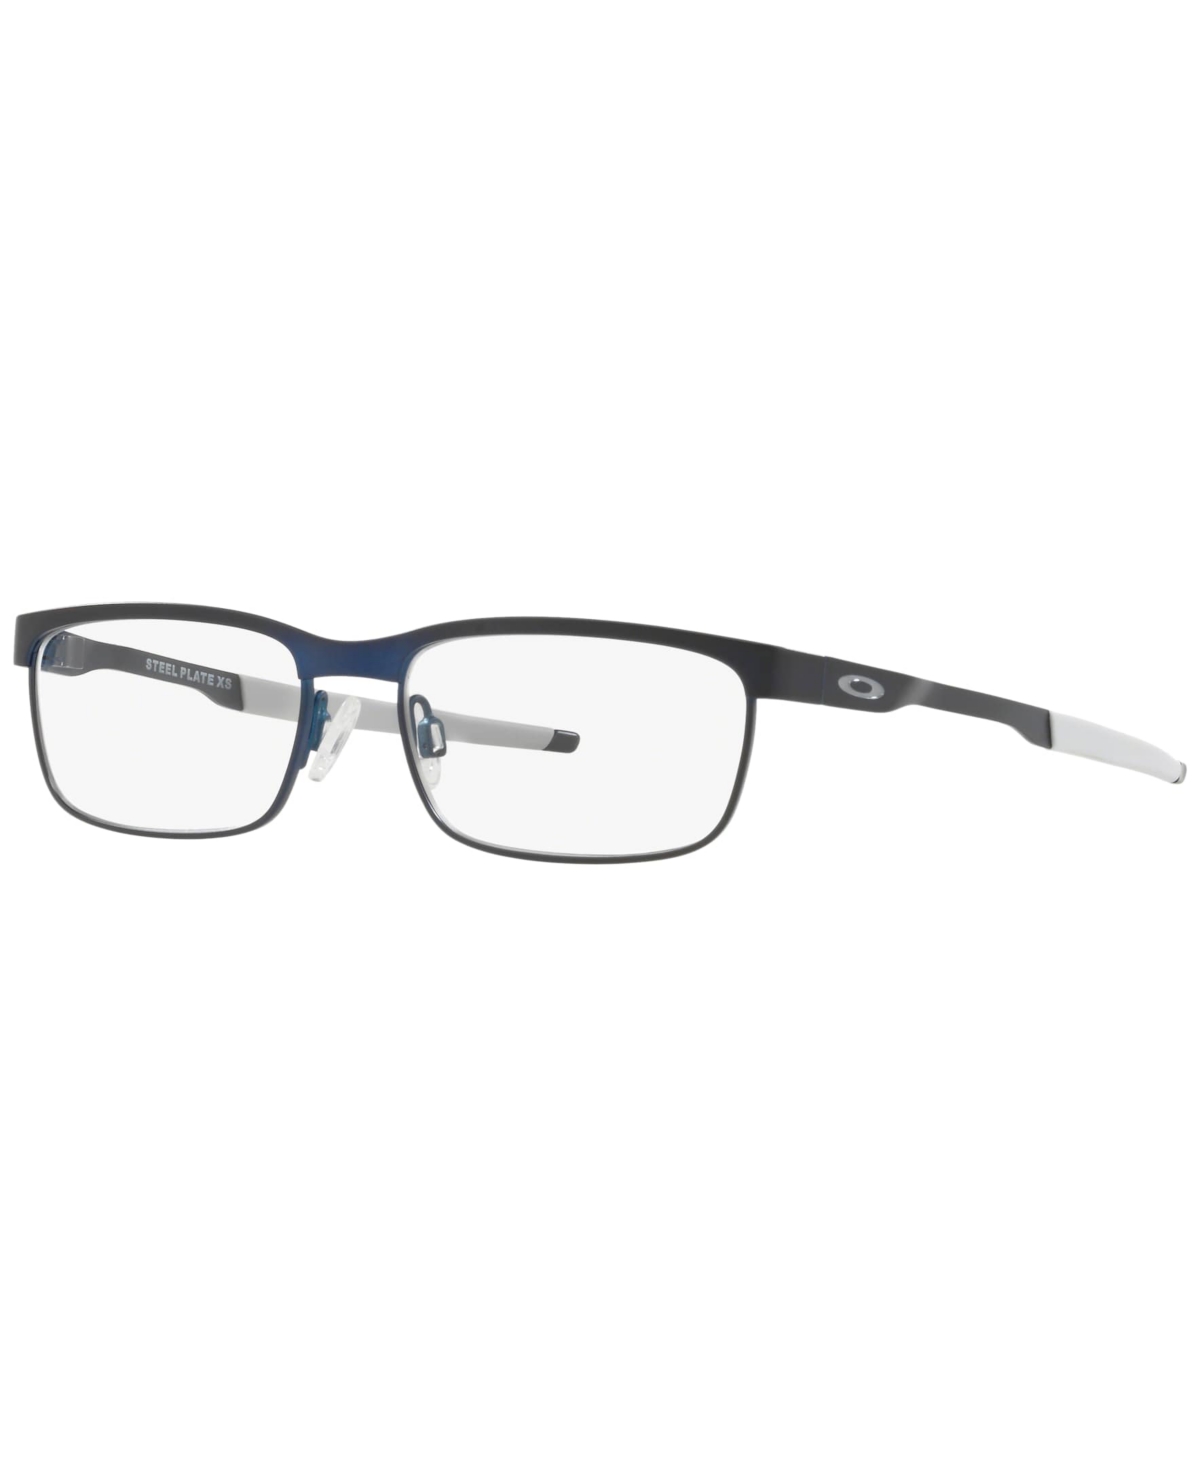 Child Steel Plate Xs Youth Fit Eyeglasses, OY3002 - Matte Midnight